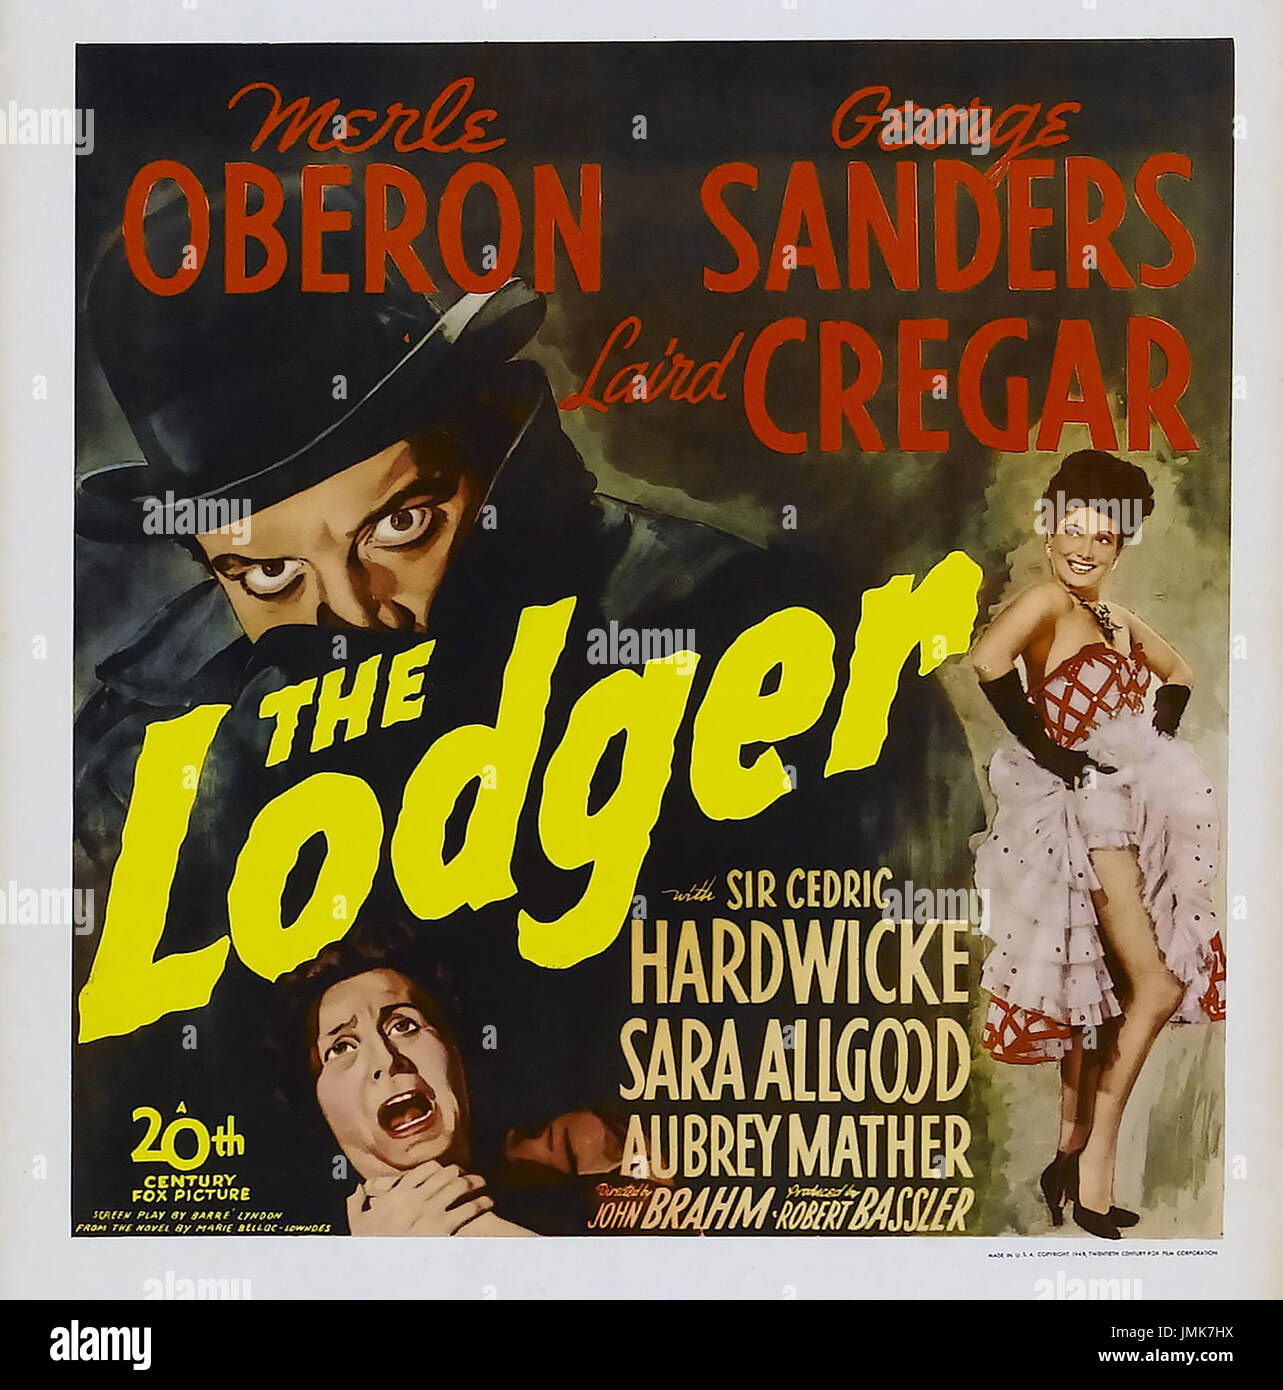 THE LODGER 1944 20th Century Fox film with Merle Oberon Stock Photo